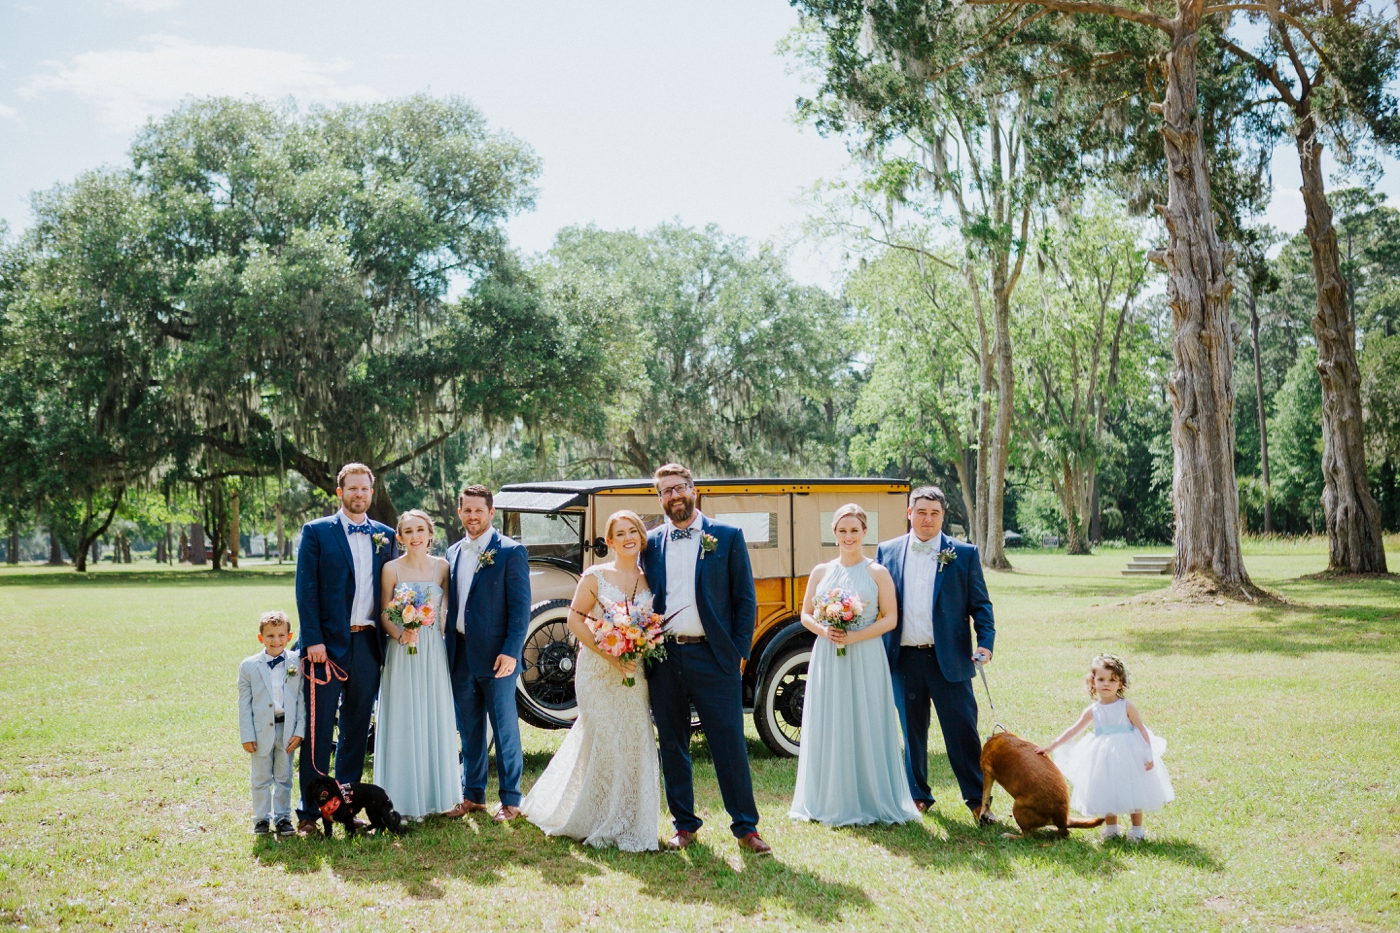 Dusty blue bridesmaids at a spring Kentucky Derby Inspired Wedding - Izzy and Co. Photography